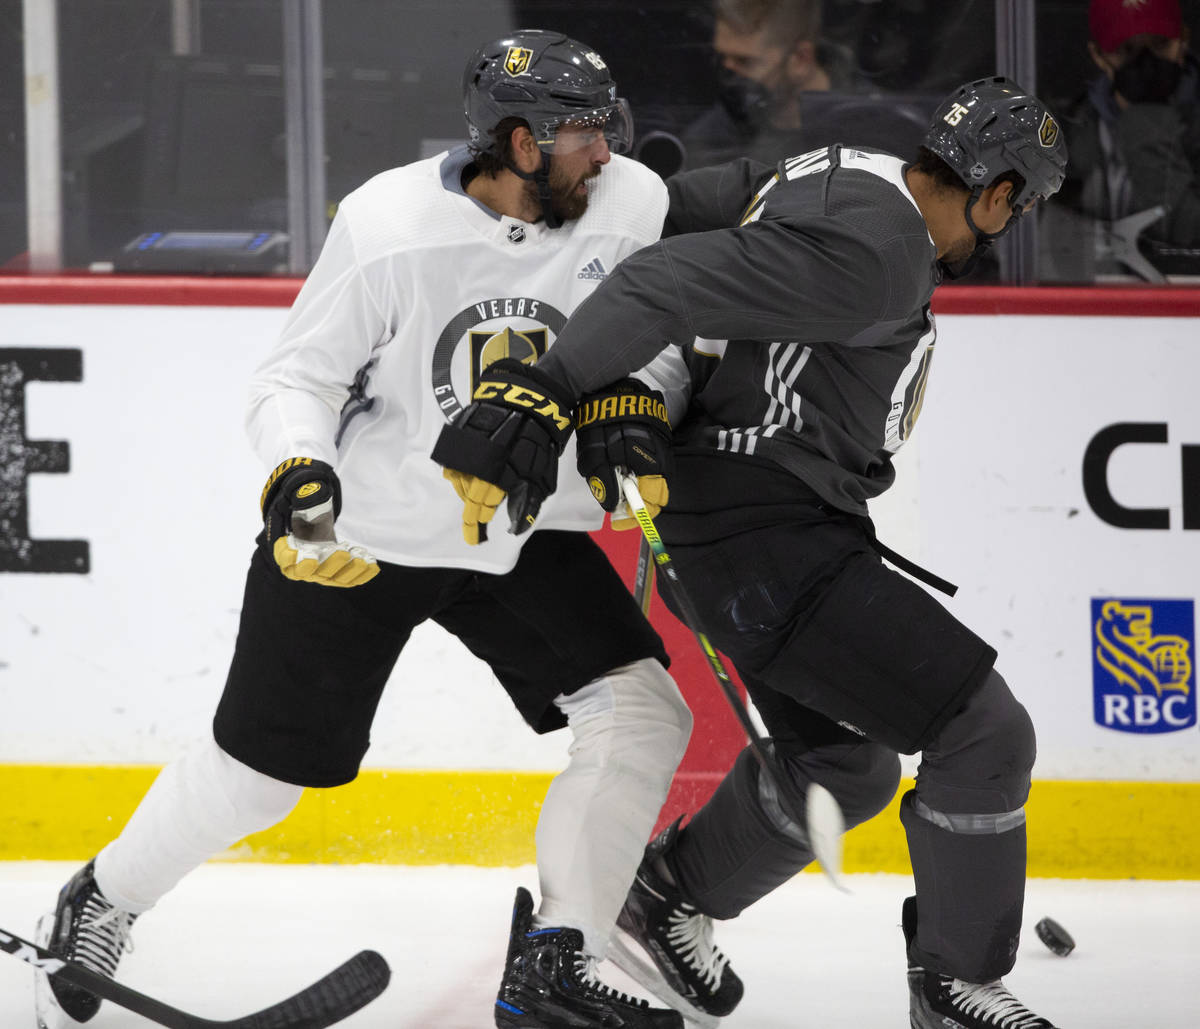 Golden Knights' forward Alex Tuch (89) and forward Ryan Reaves (75) fight for the puck during p ...